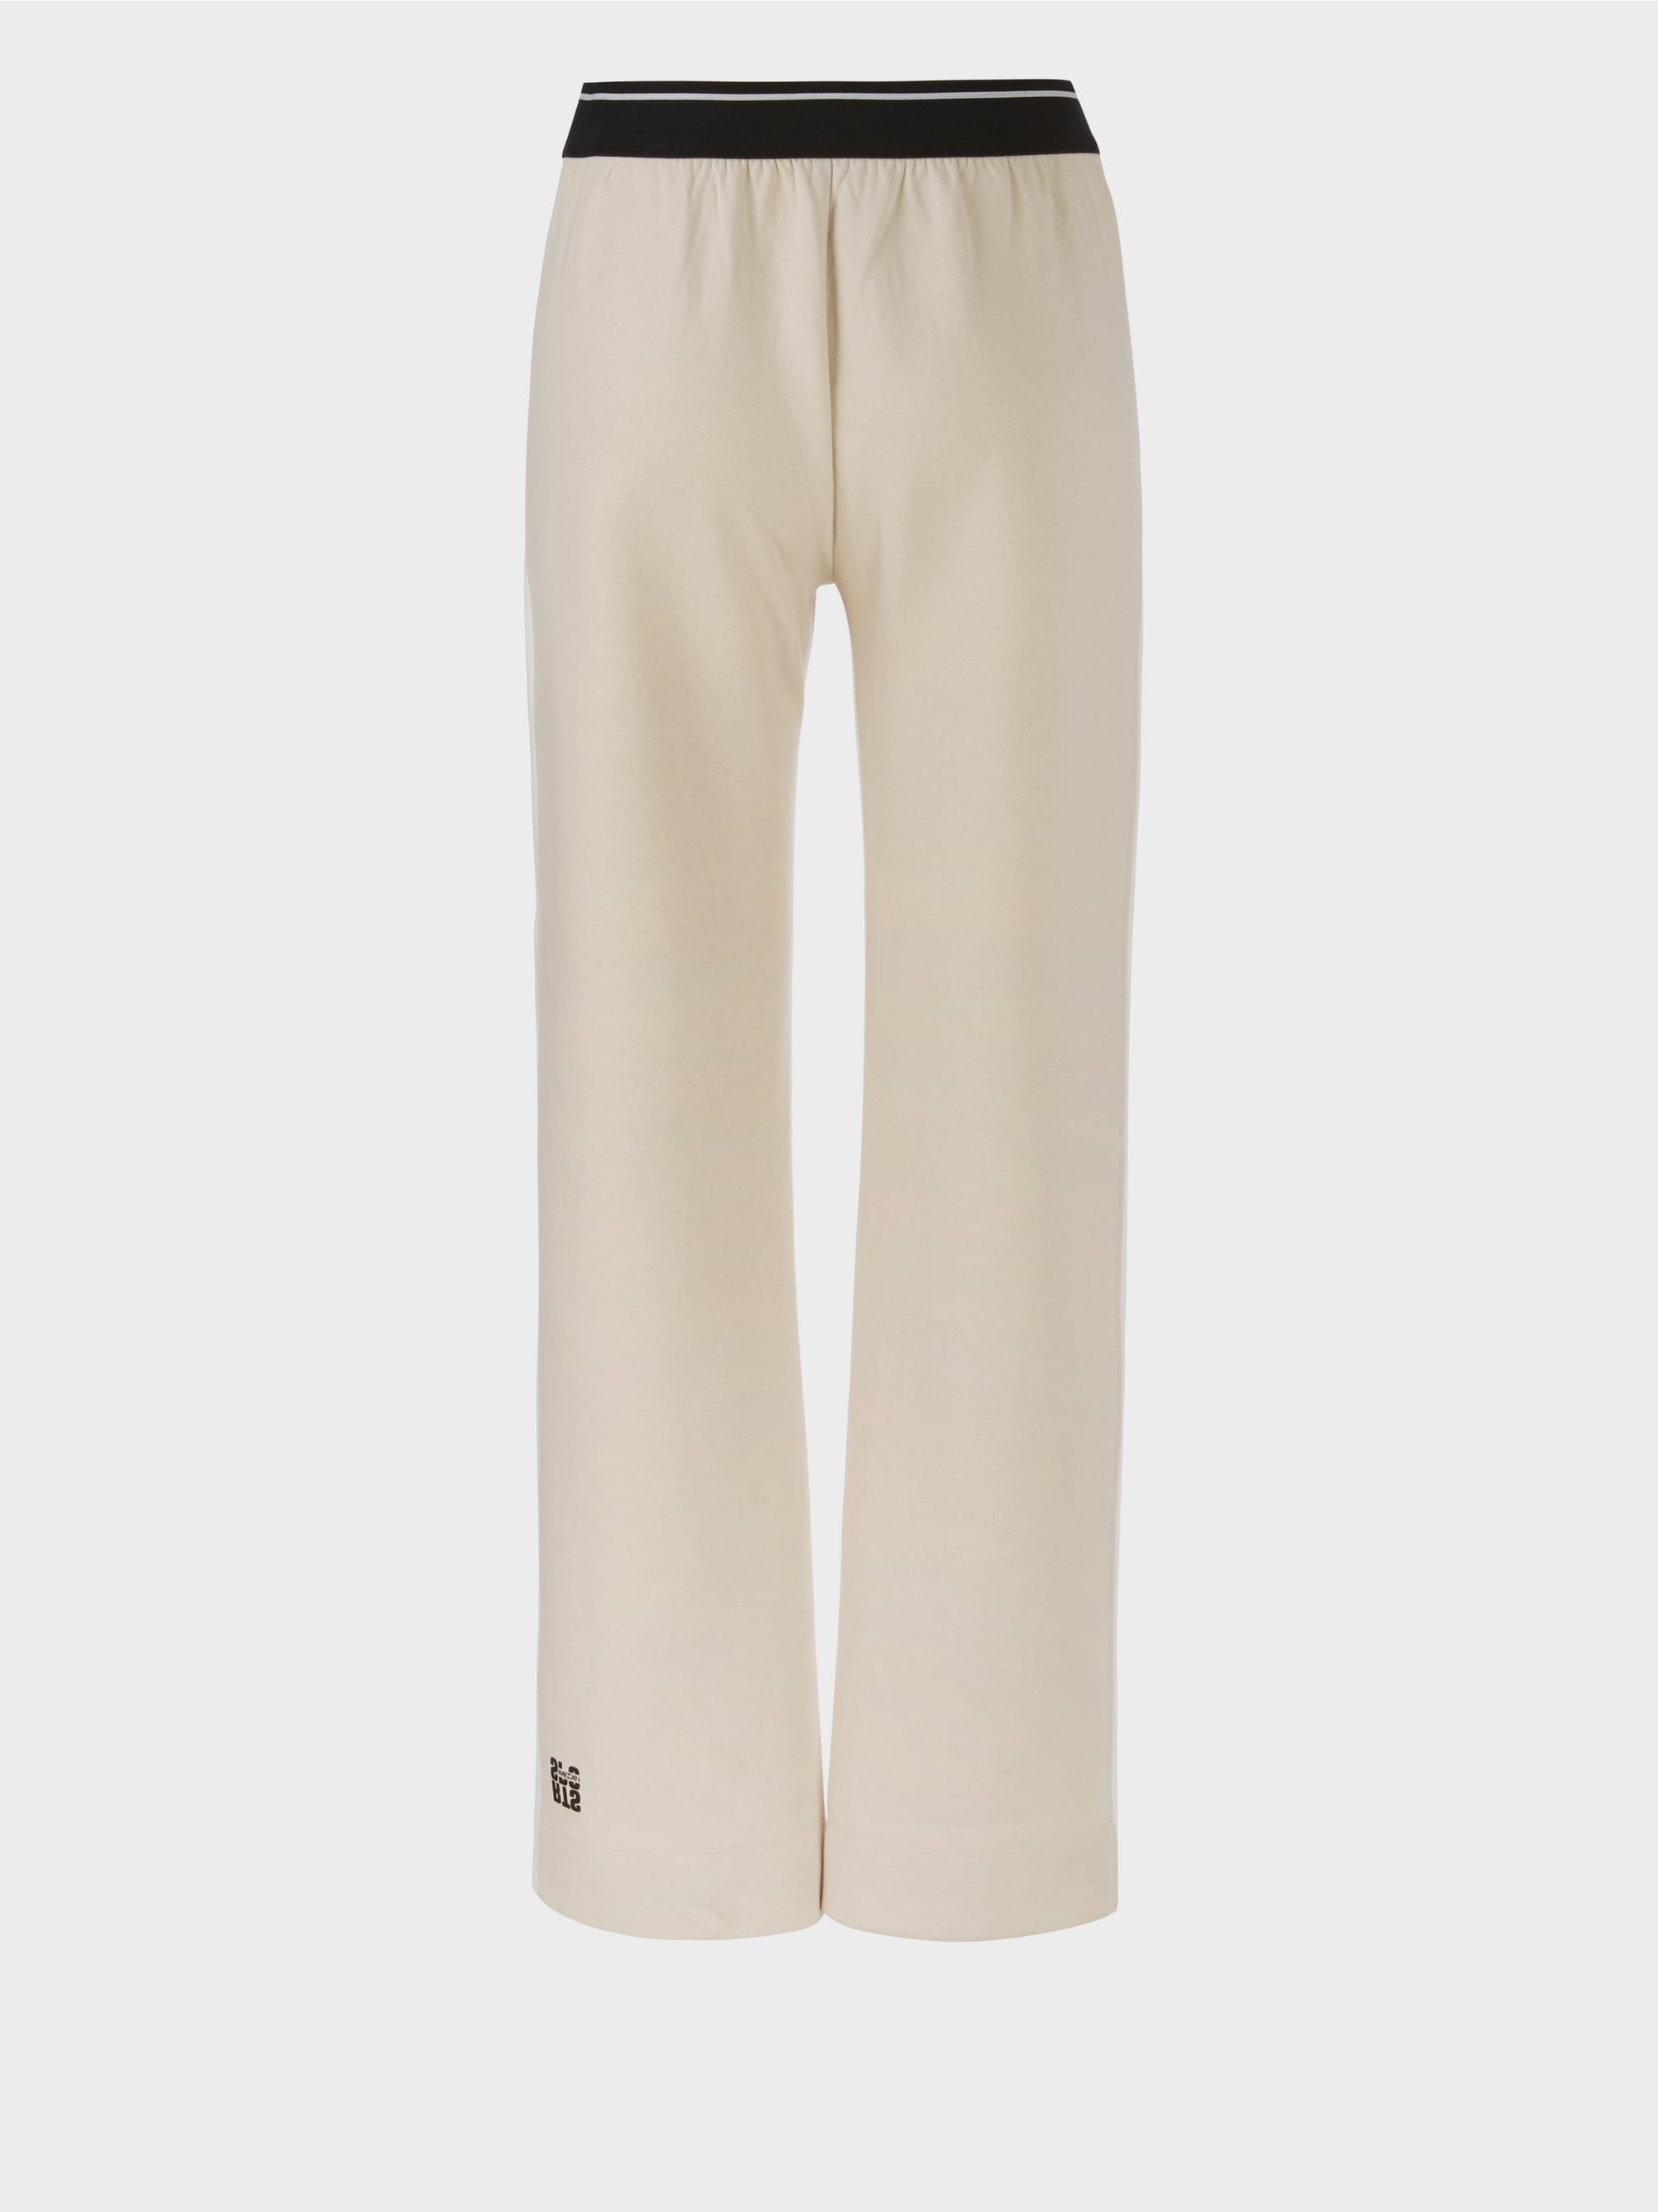 Wels Pants - With Gallon_WS 81.12 J09_117_02